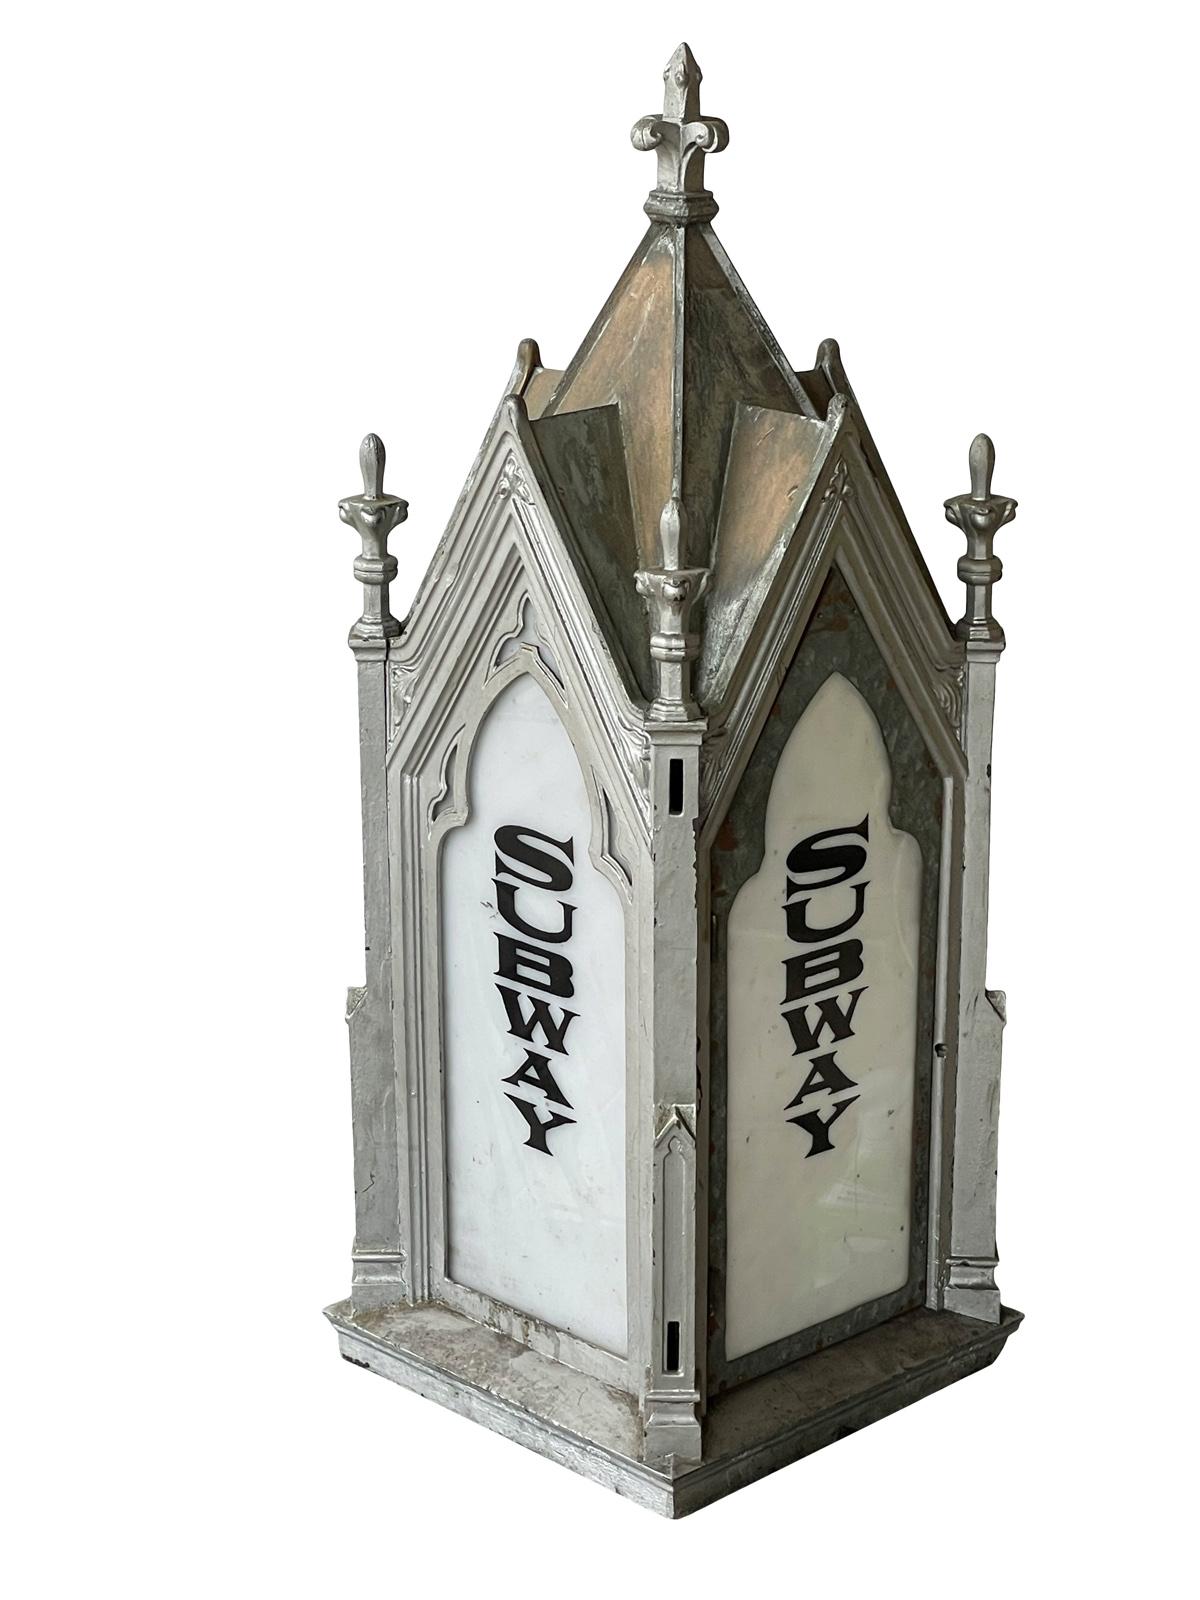 This is a truly amazing piece of New York City subway history solid bronze lantern with 2 sets of 4 original acrylic subway inserts black and white this does not have any wiring or socket it’s just the bronze structure only